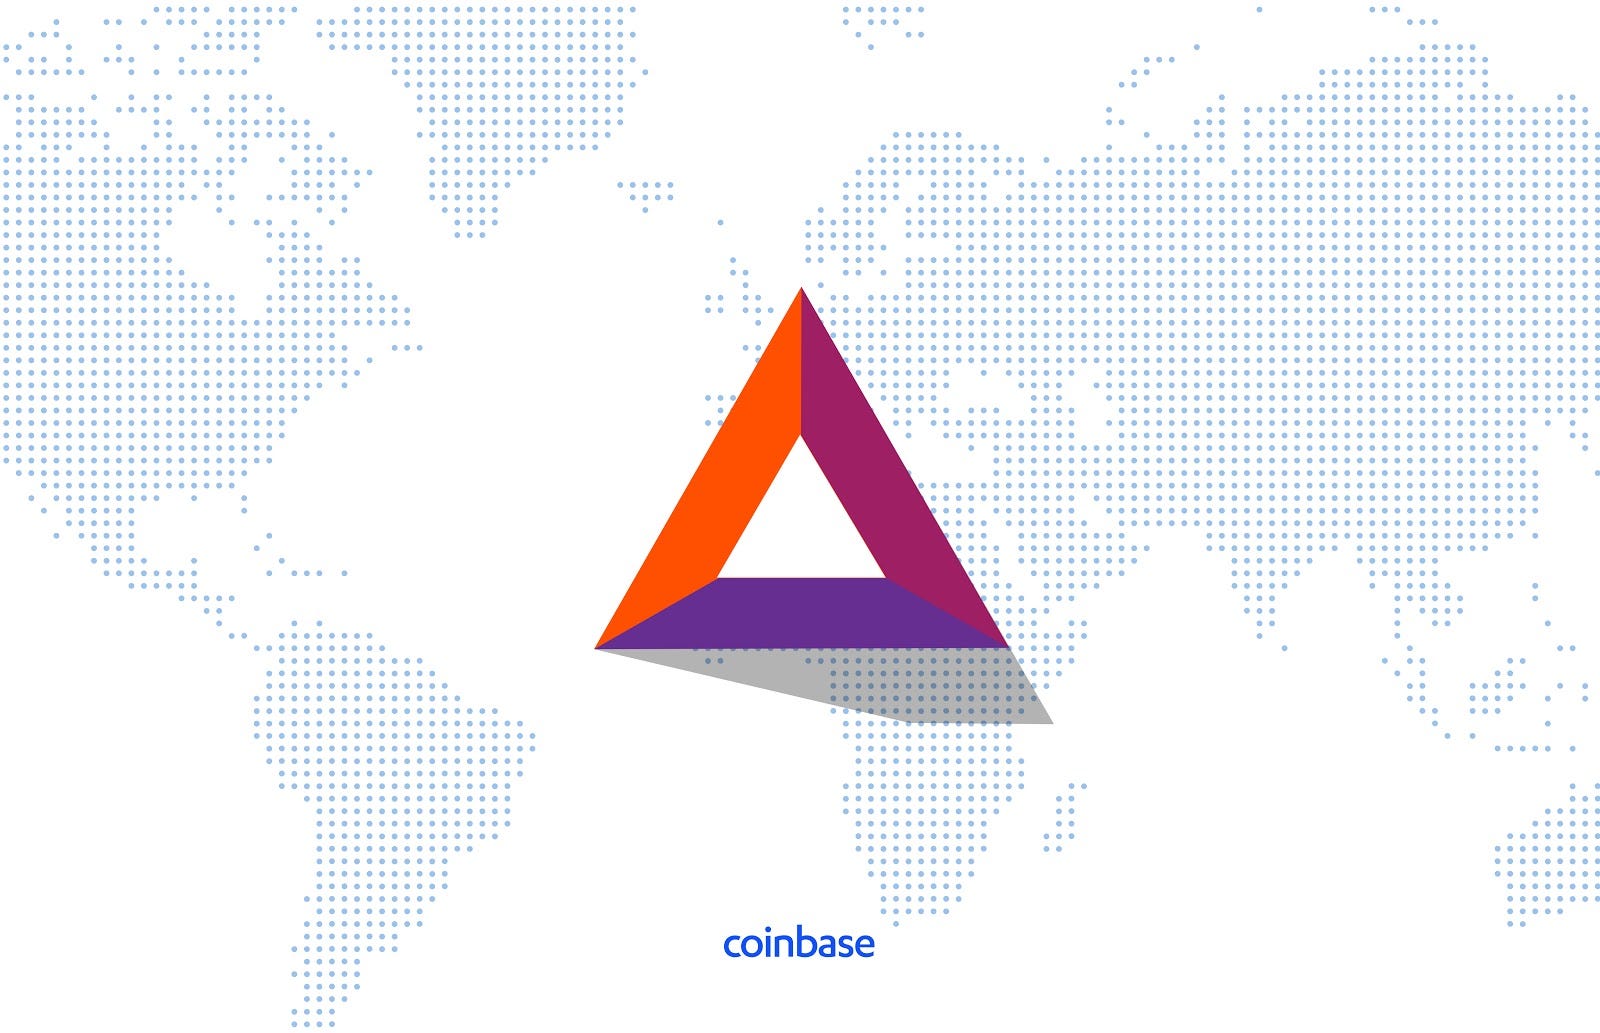 Buy And Sell Bat On Coinb!   ase The Coinbase Blog - 